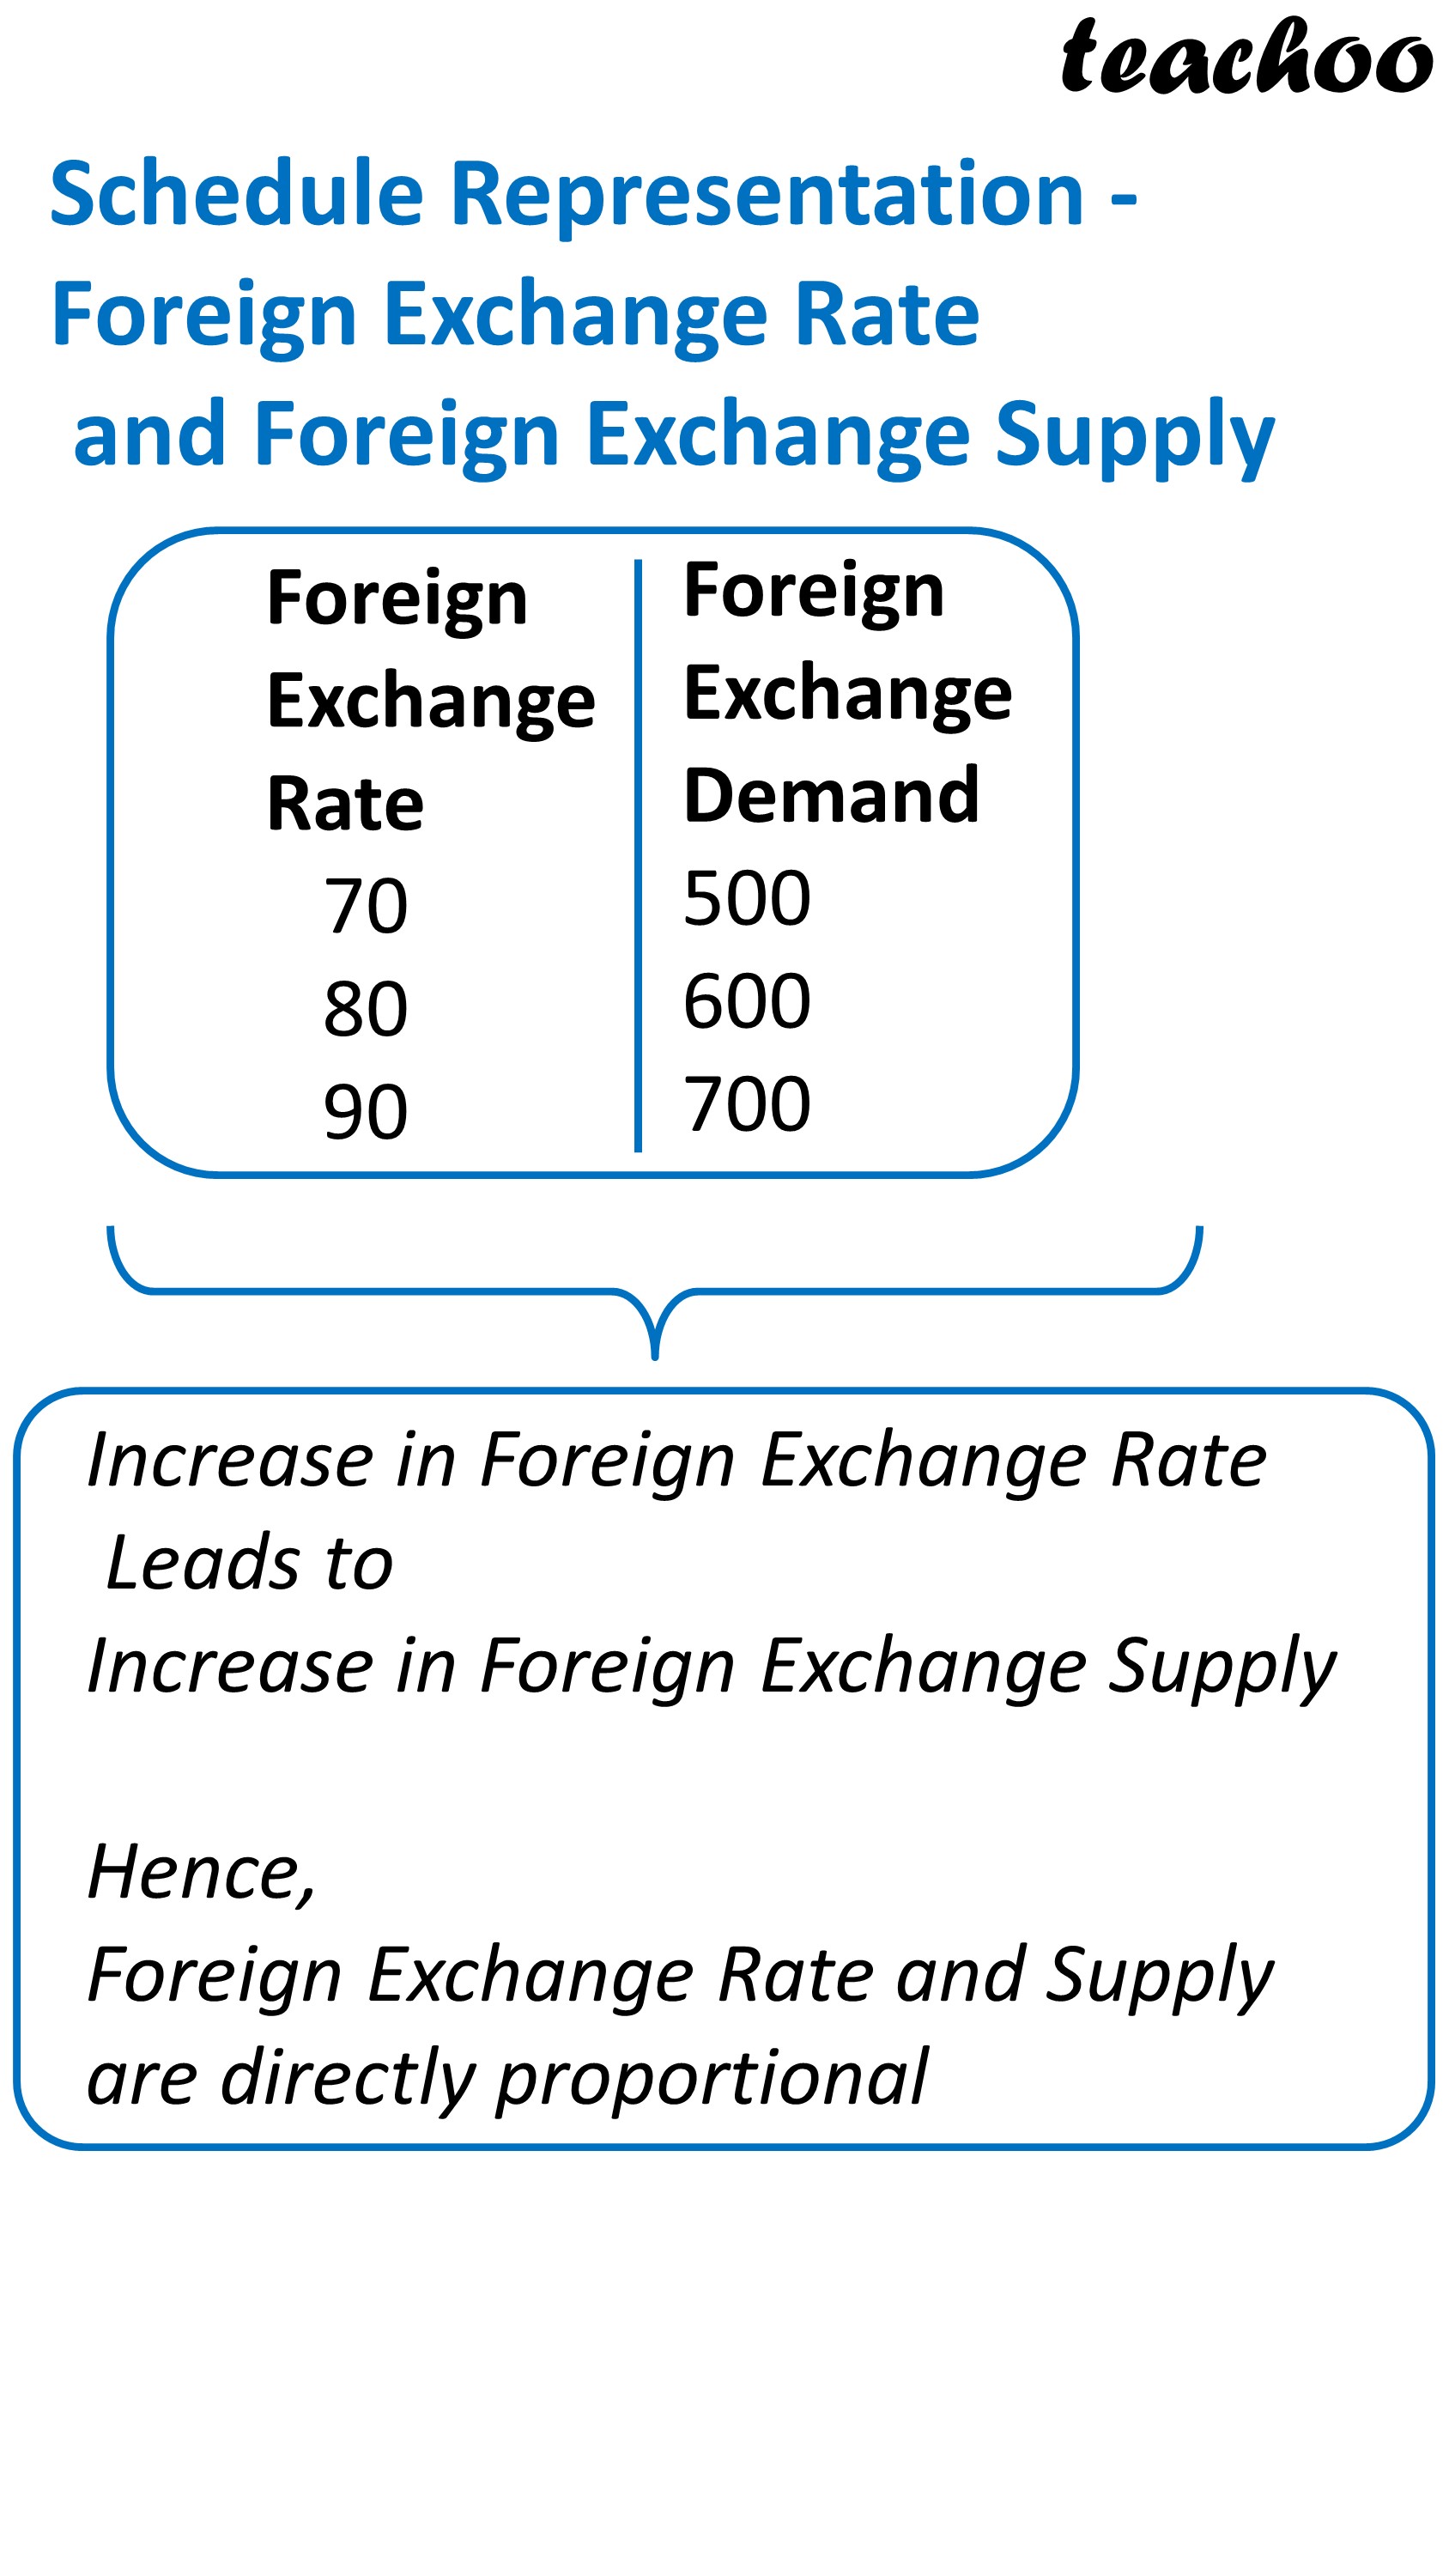 Schedule Representation -Foreign Exchange Rate and Foreign Exchange Supply - Teachoo.JPG